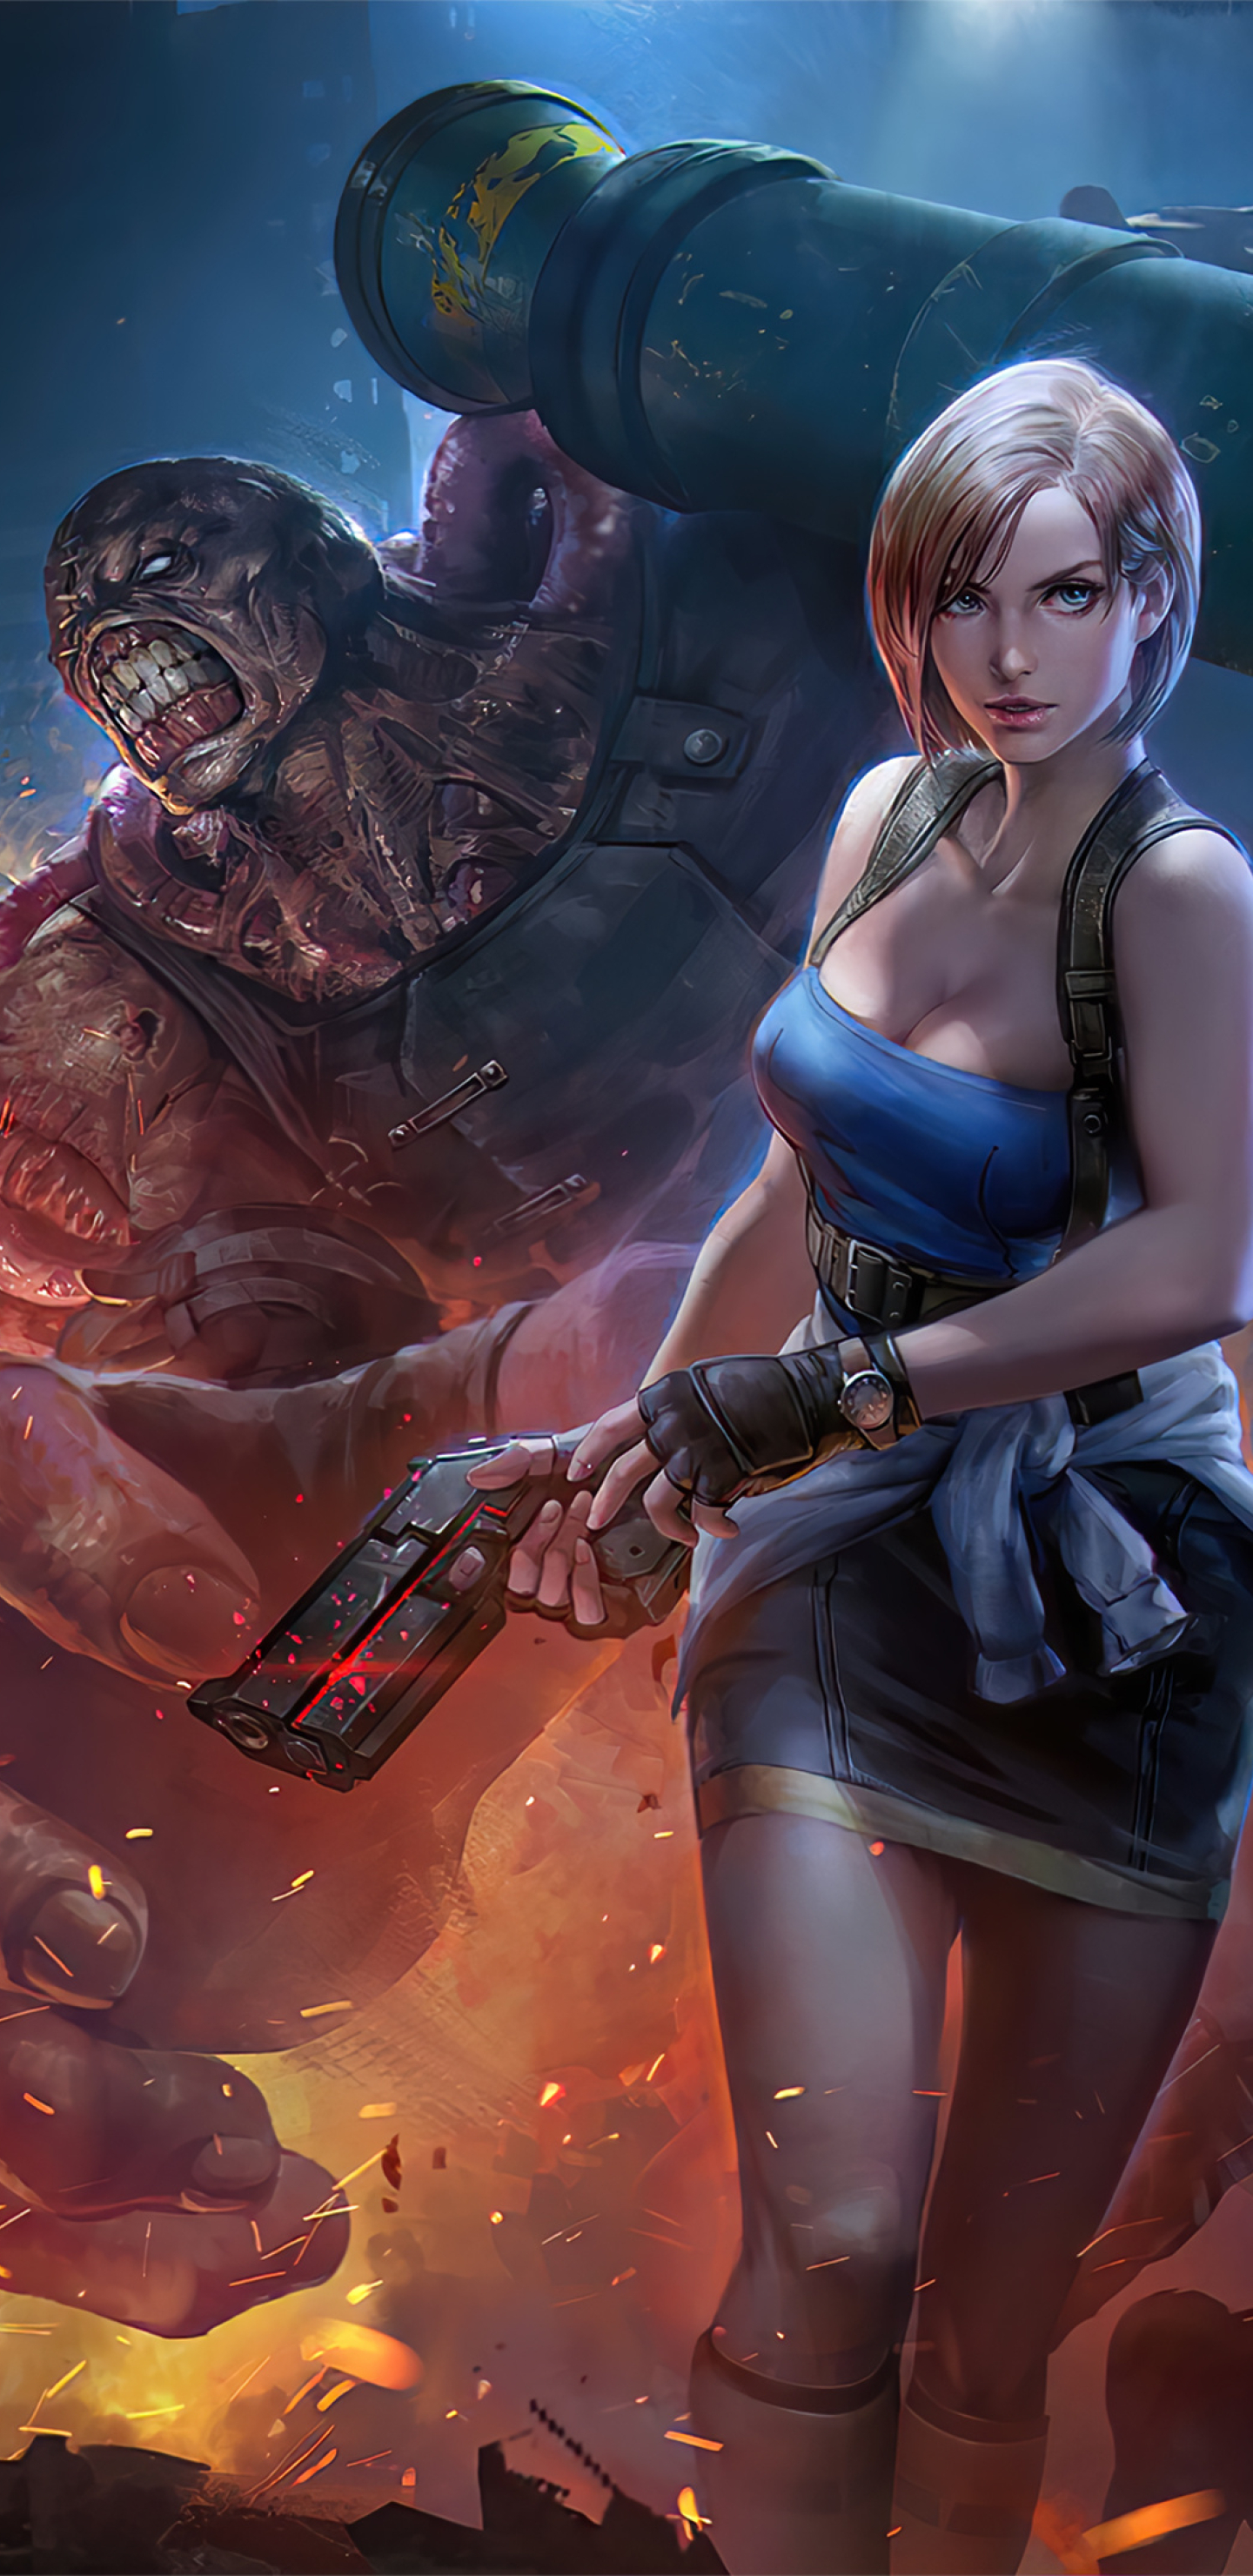 1440x2960 Resident Evil 2020 Samsung Galaxy Note 9,8, S9 ...